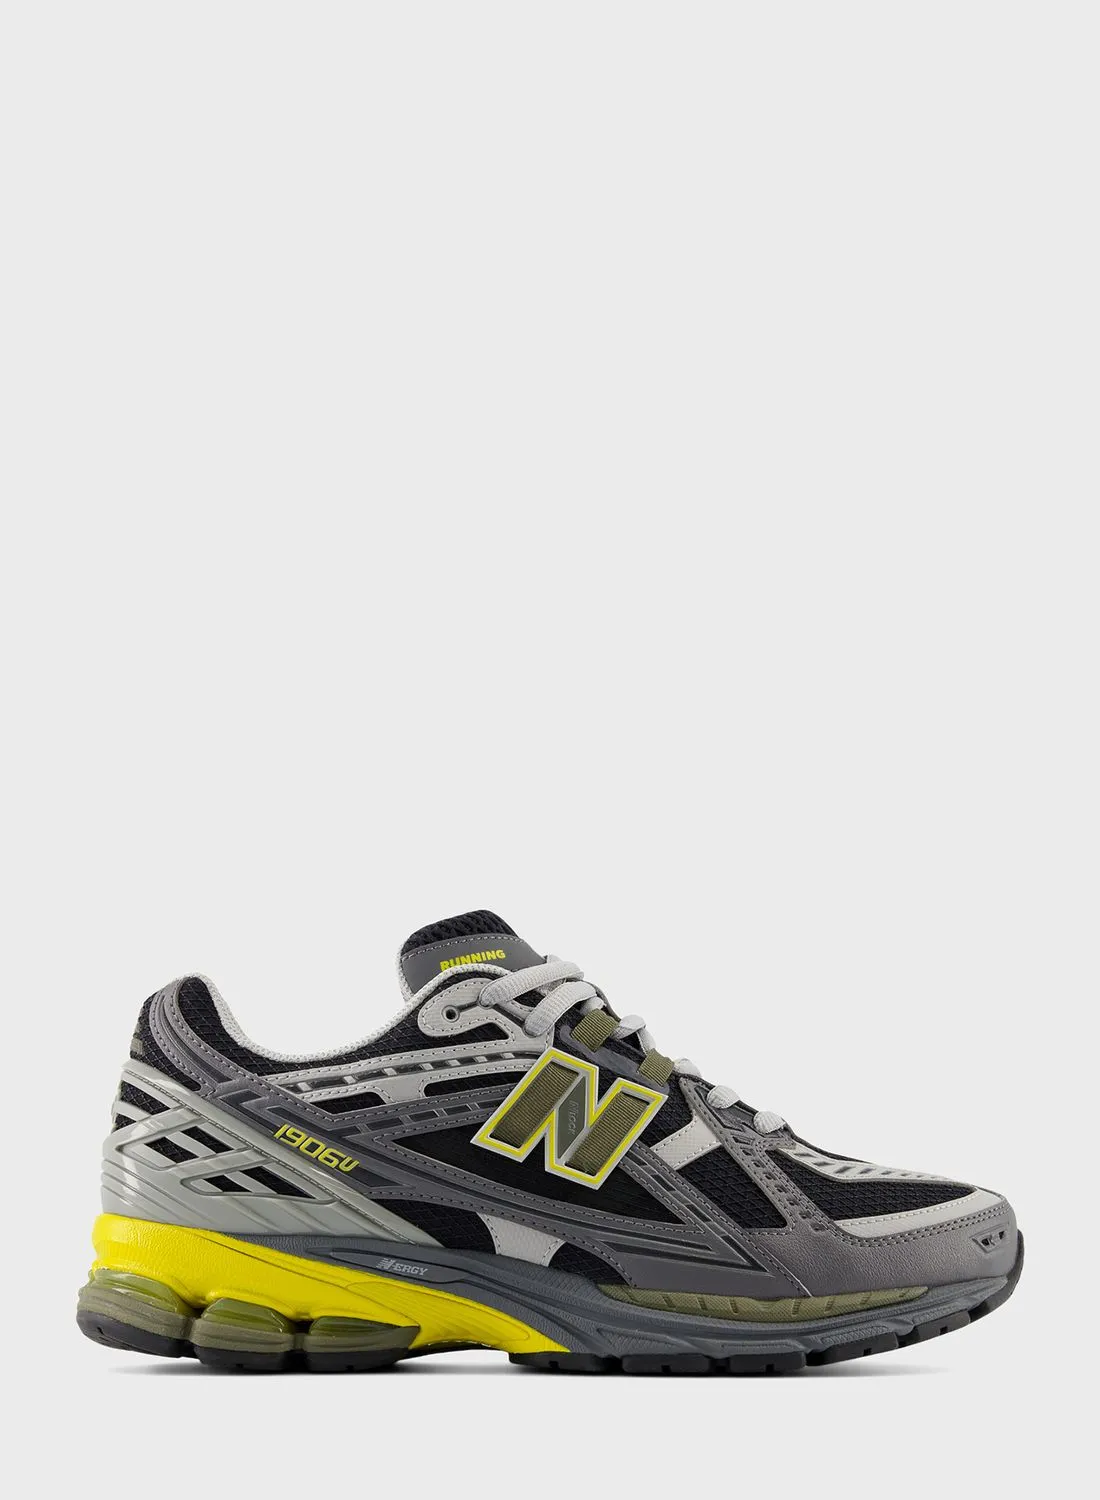 New Balance 1906 Sneakers